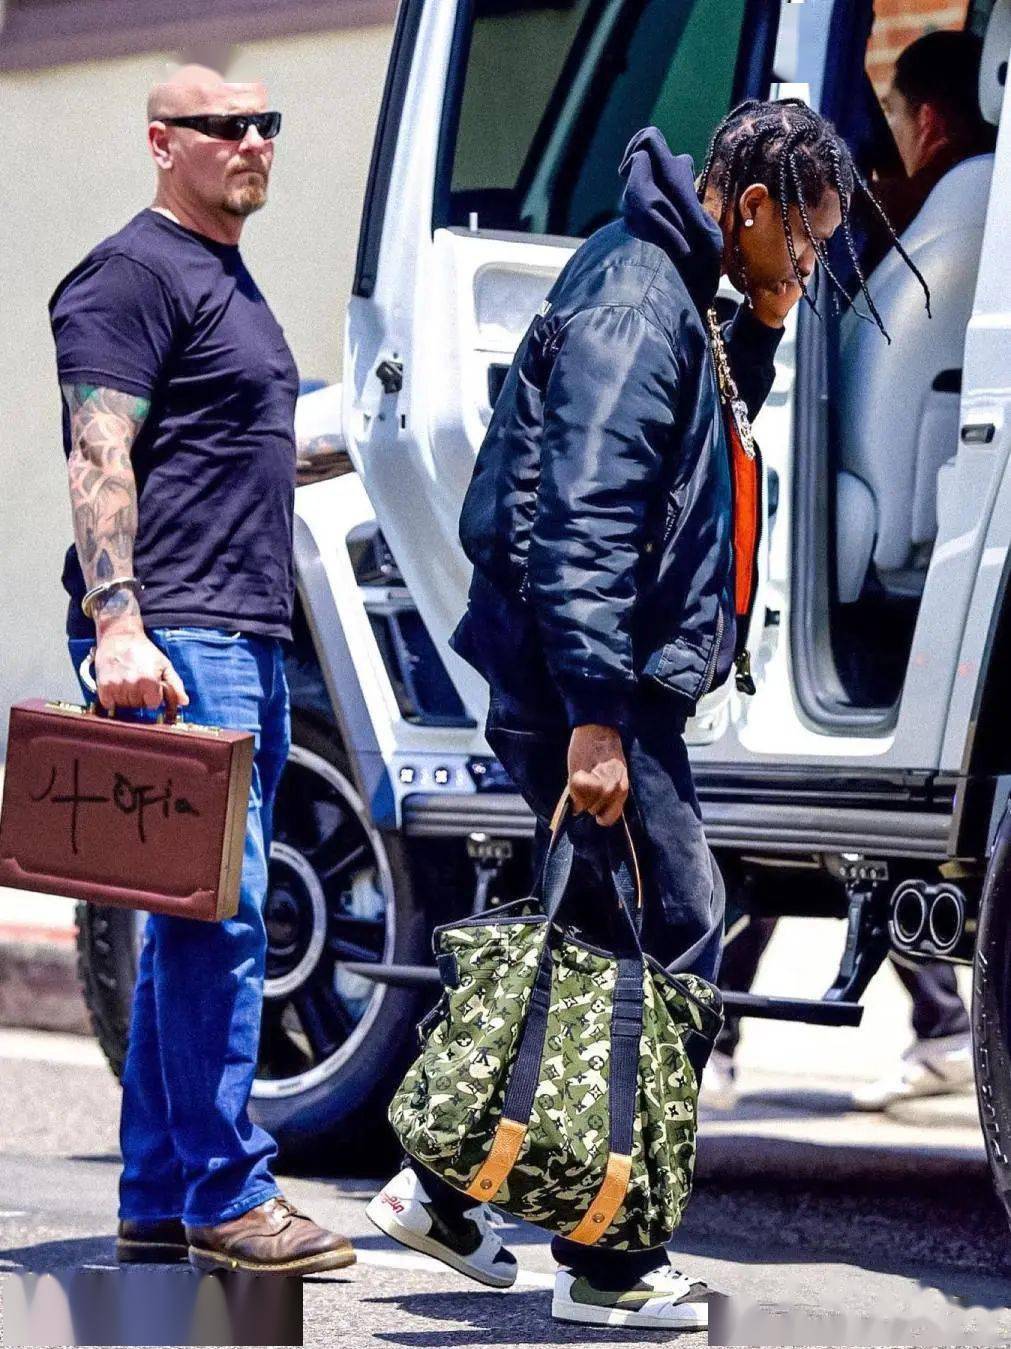 SPOTTED: Travis Scott Carries LV Briefcase while in Supreme